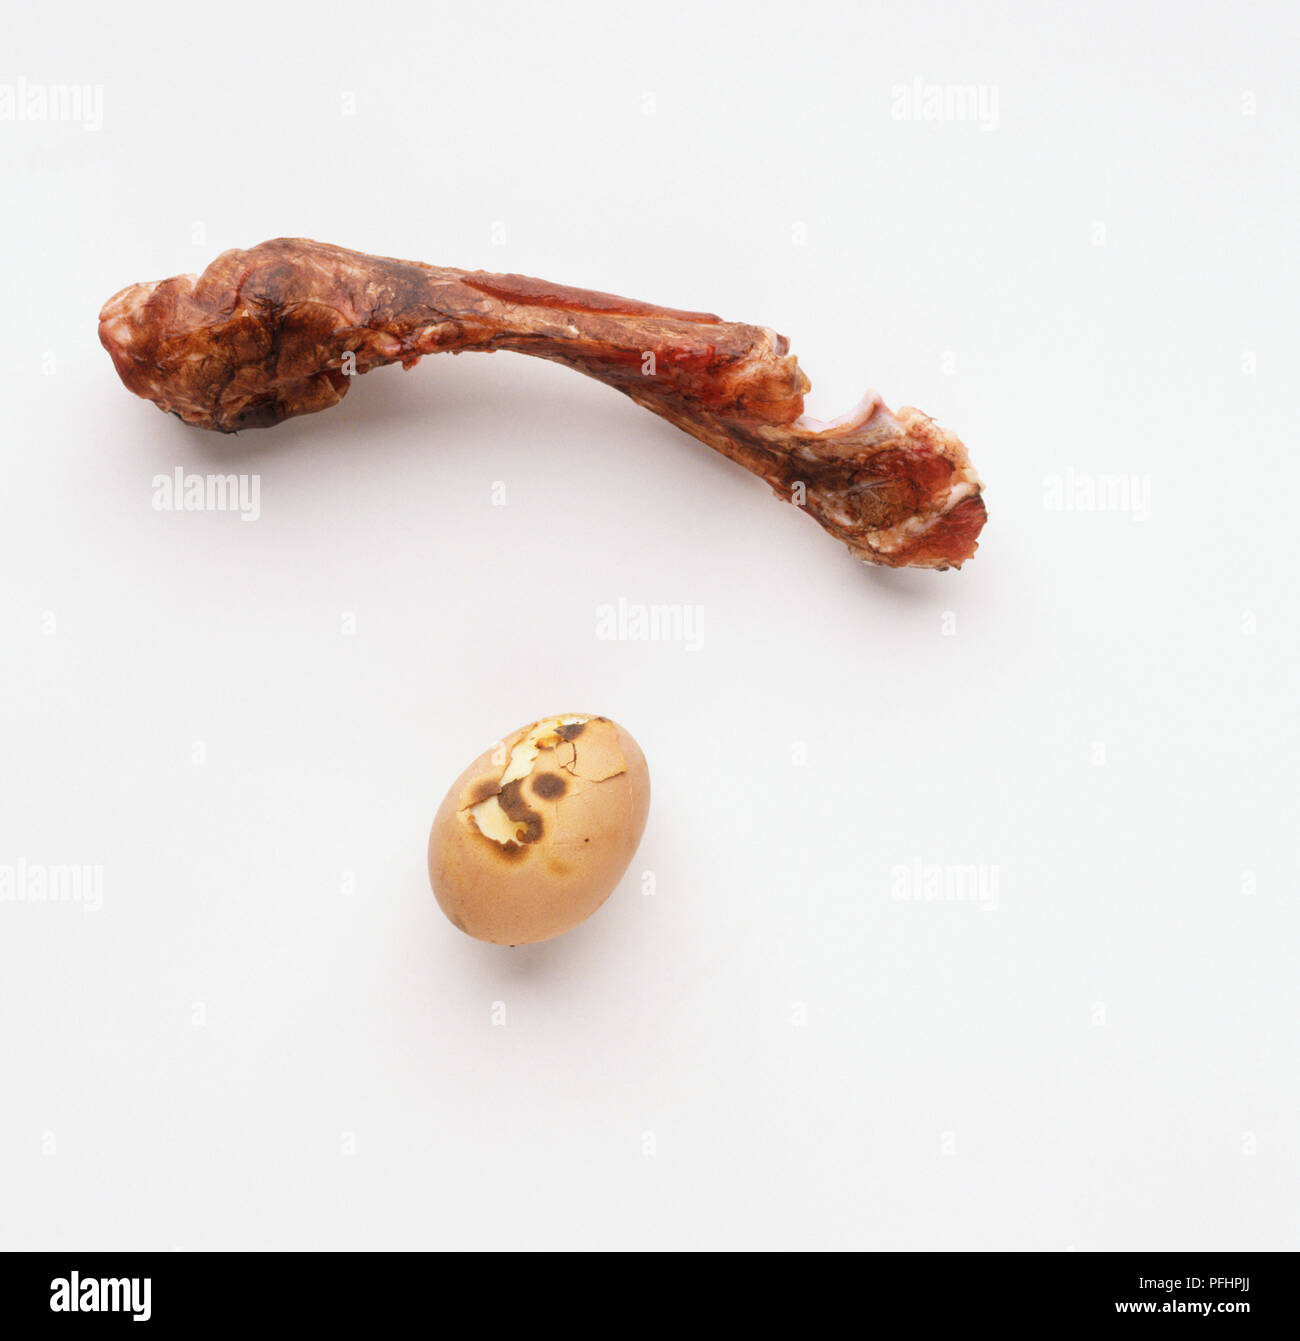 Burnt egg and and shank bone Stock Photo